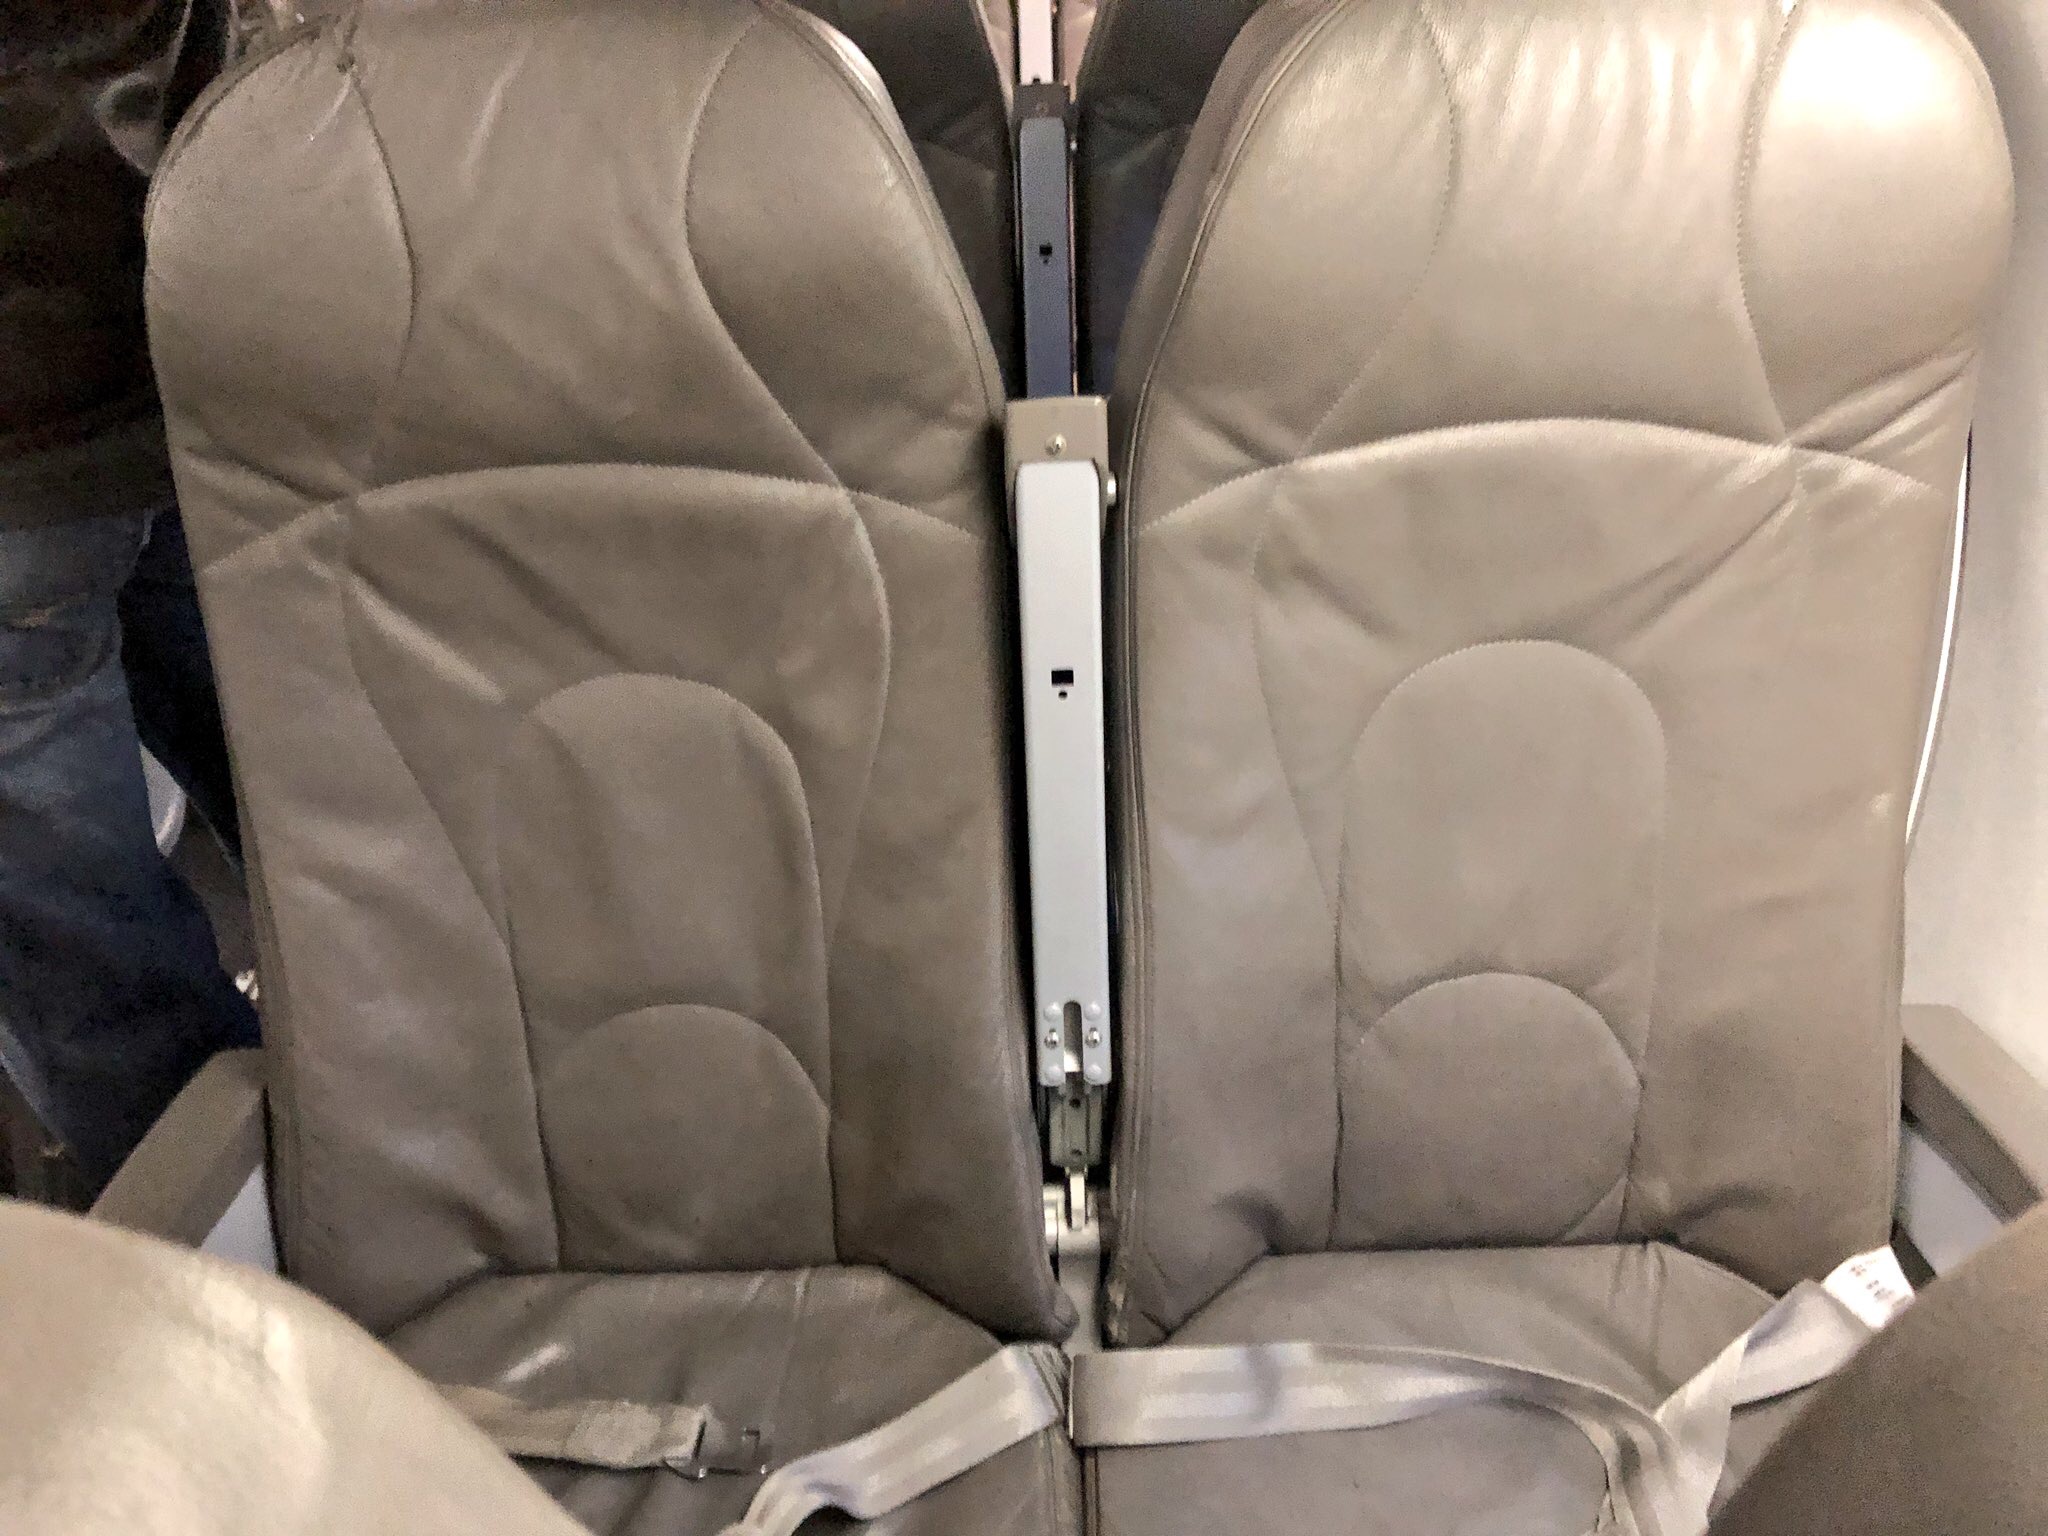 a seat on an airplane